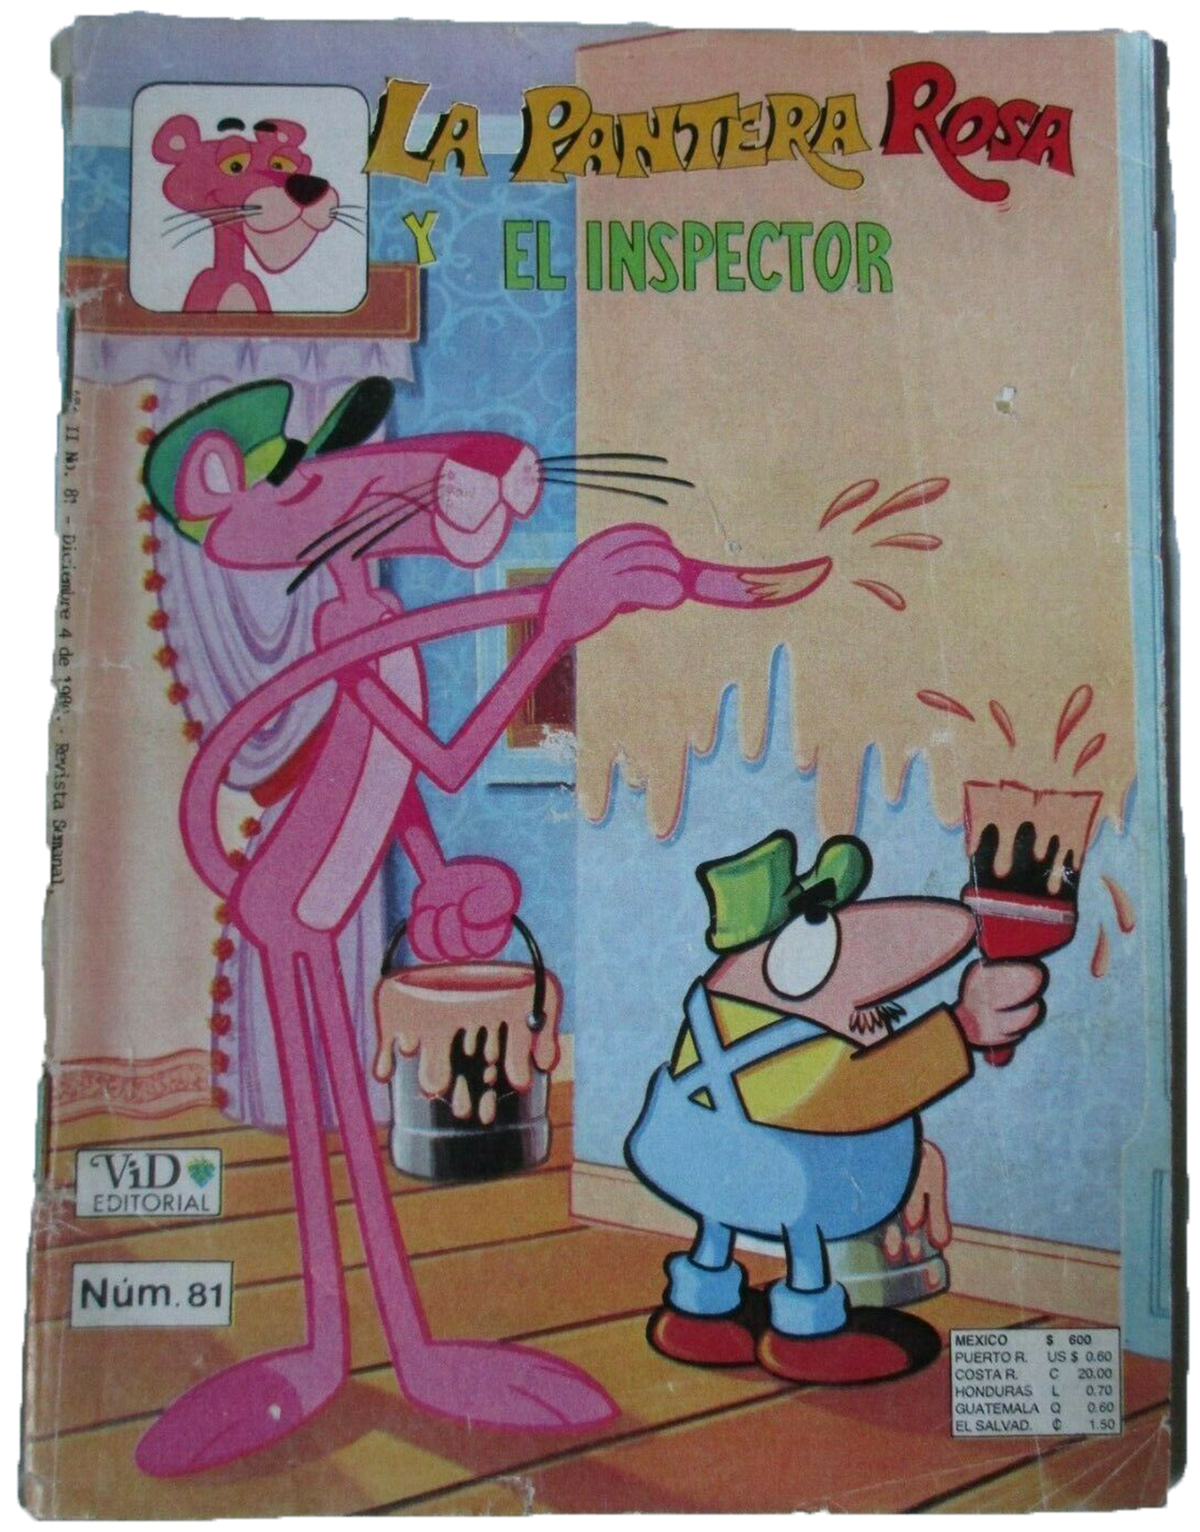 LA PANTERA ROSA #9 VID MEXICAN COMIC MADE IN MEXICO THE PINK PANTHER